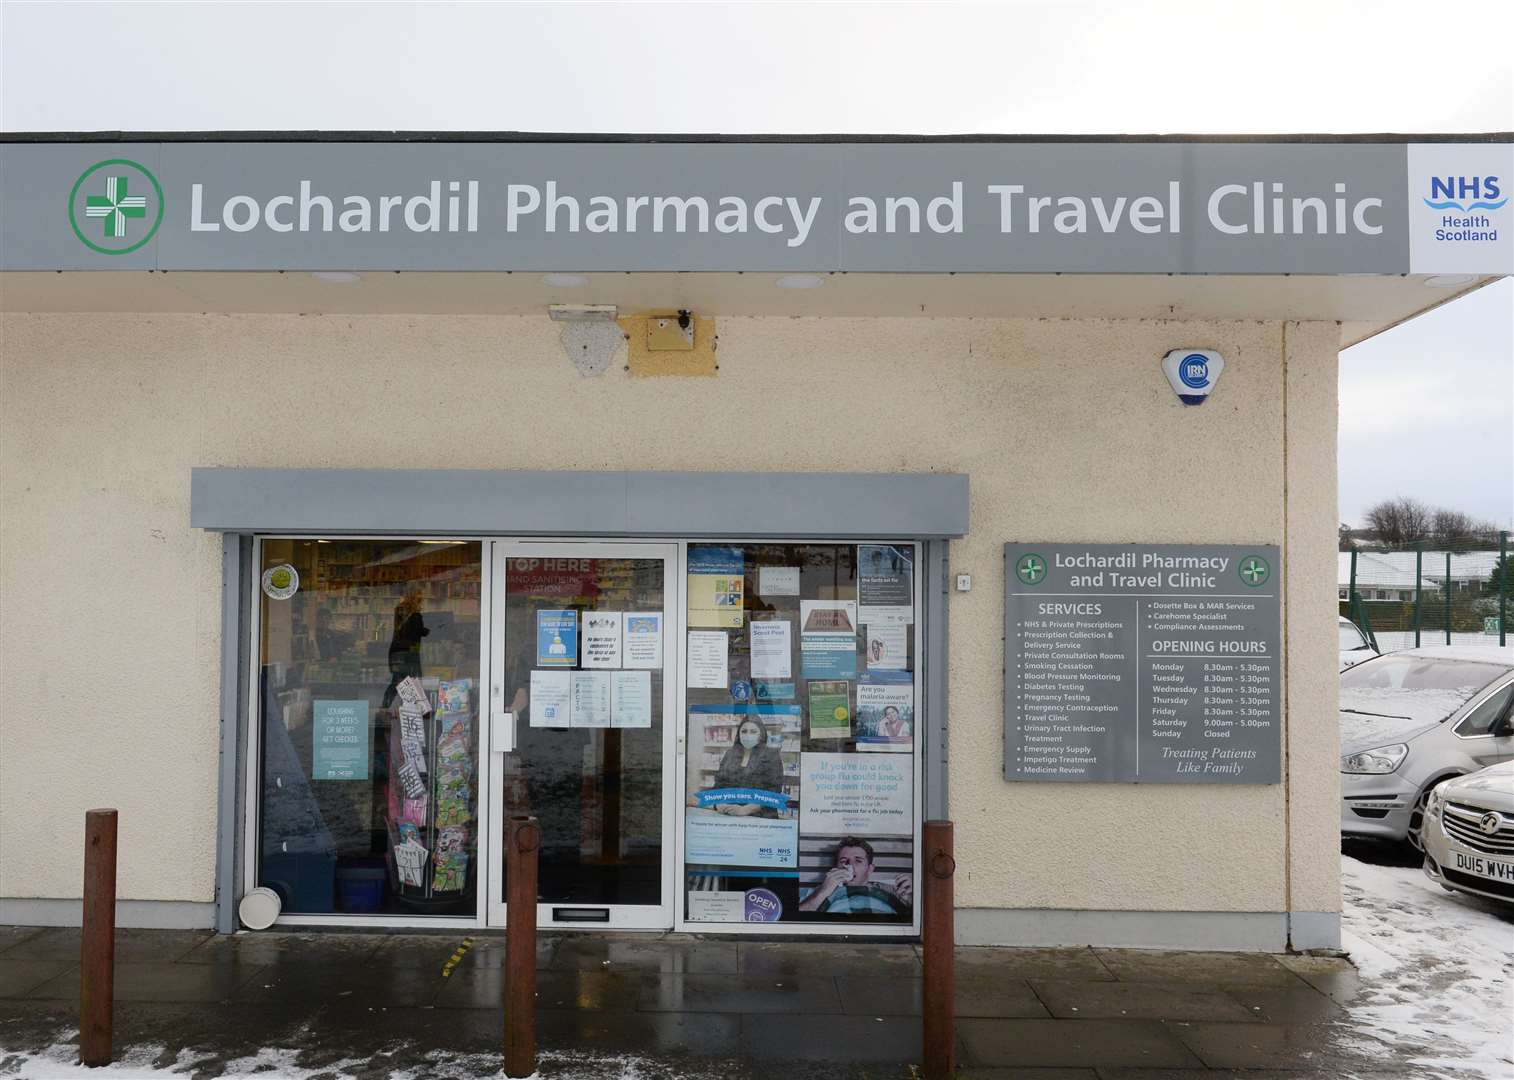 Patients are advised to only order prescriptions that are needed and to collect them from outlets such as their local community pharmacy.